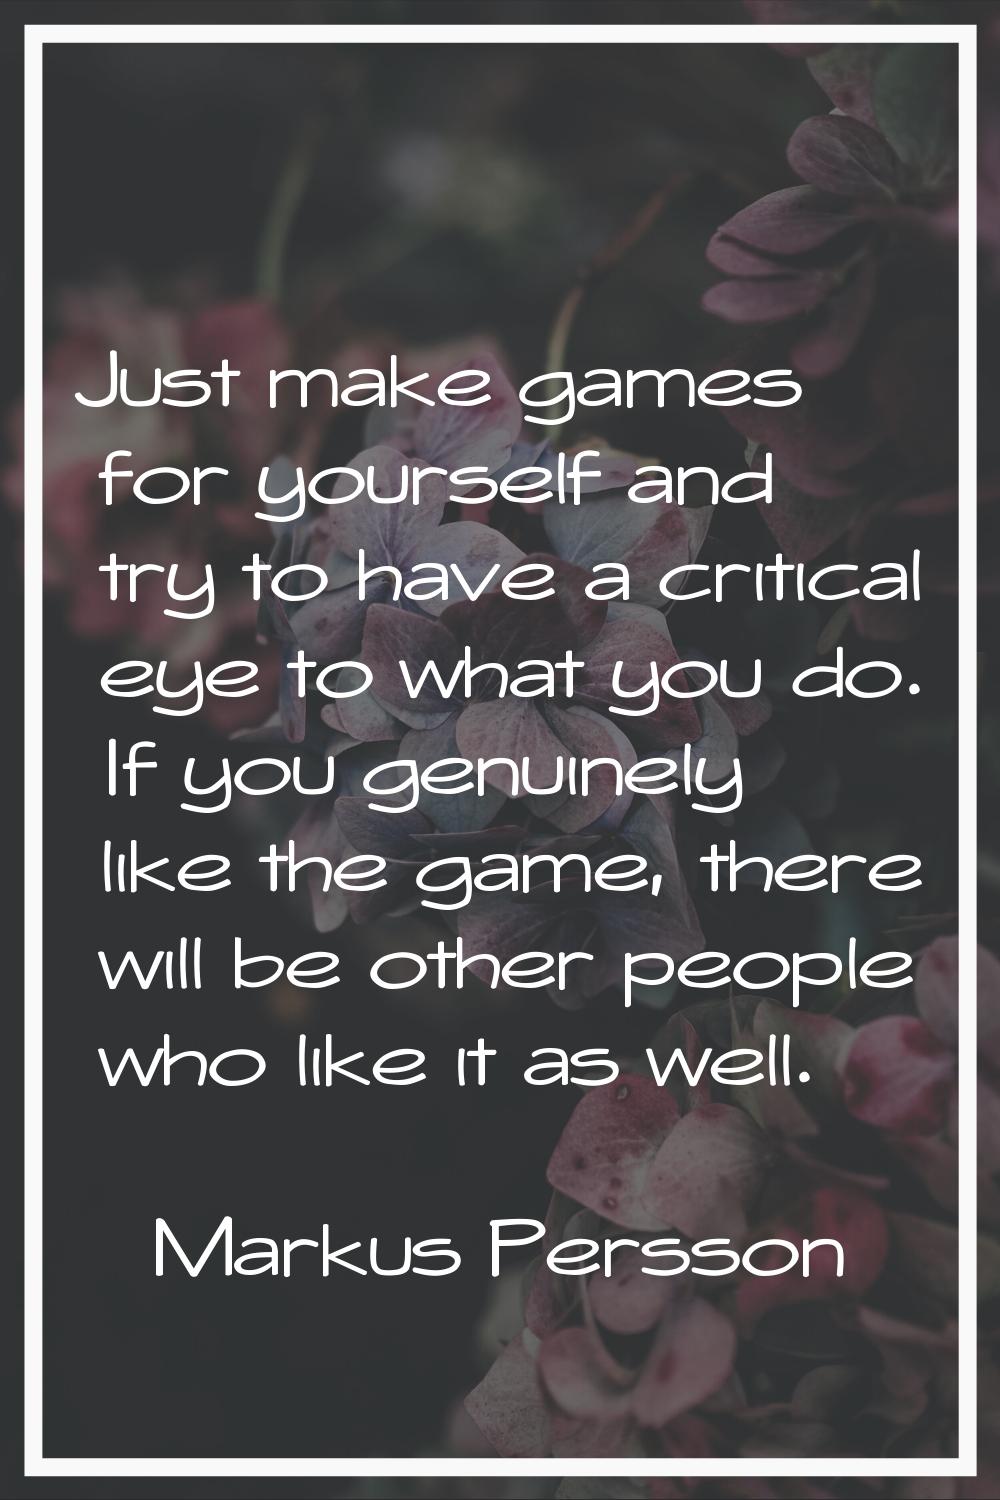 Just make games for yourself and try to have a critical eye to what you do. If you genuinely like t